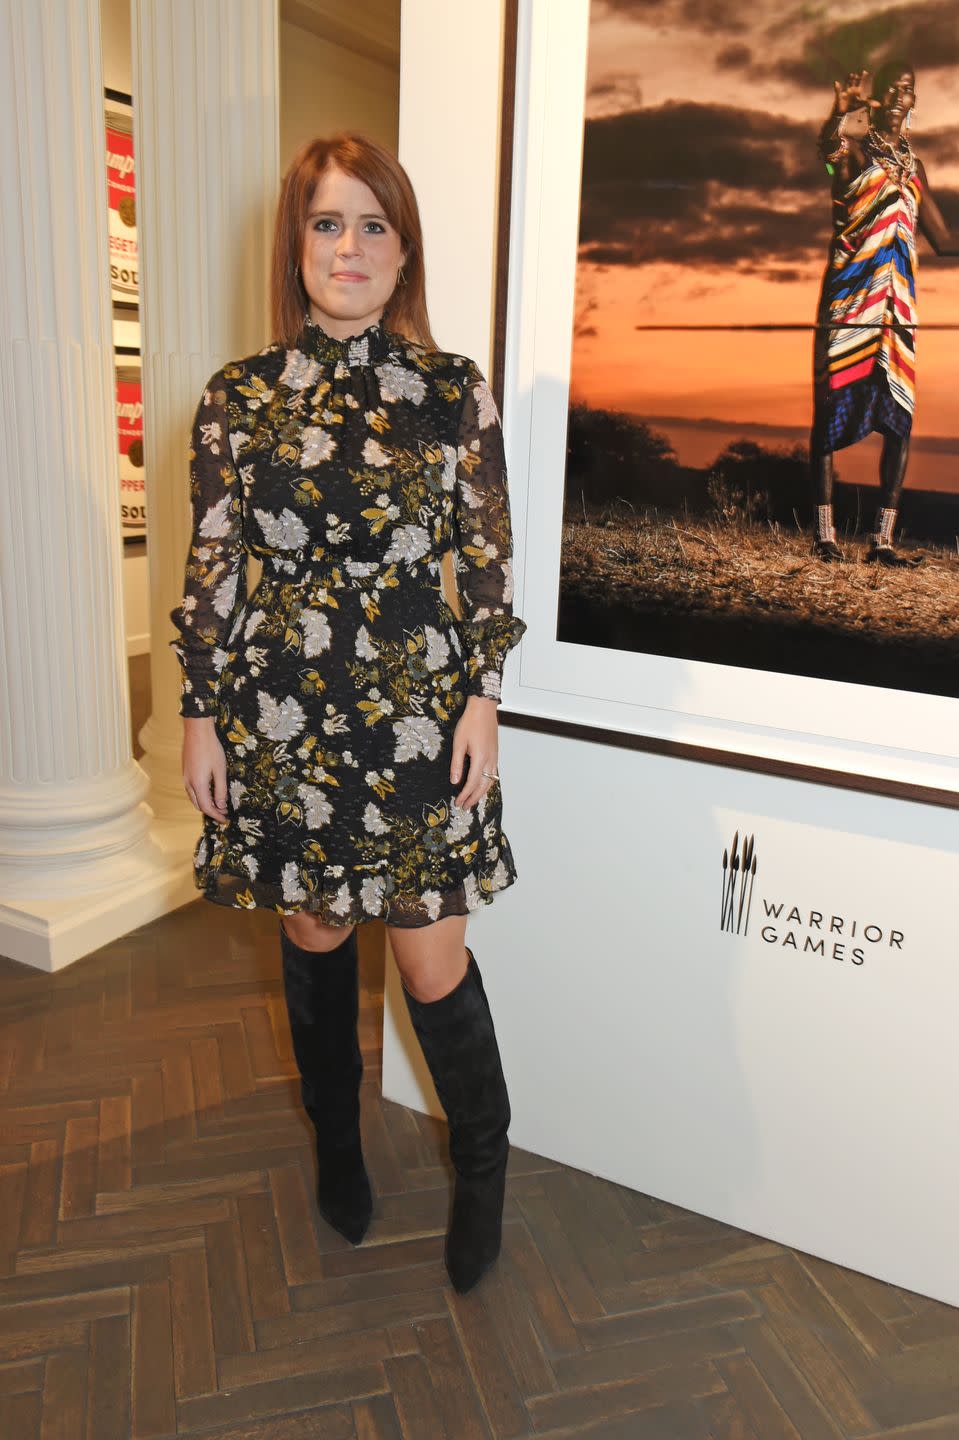 Princess Eugenie of York attends the Warrior Games Exhibition VIP preview party at The Halcyon Gallery in 2017.